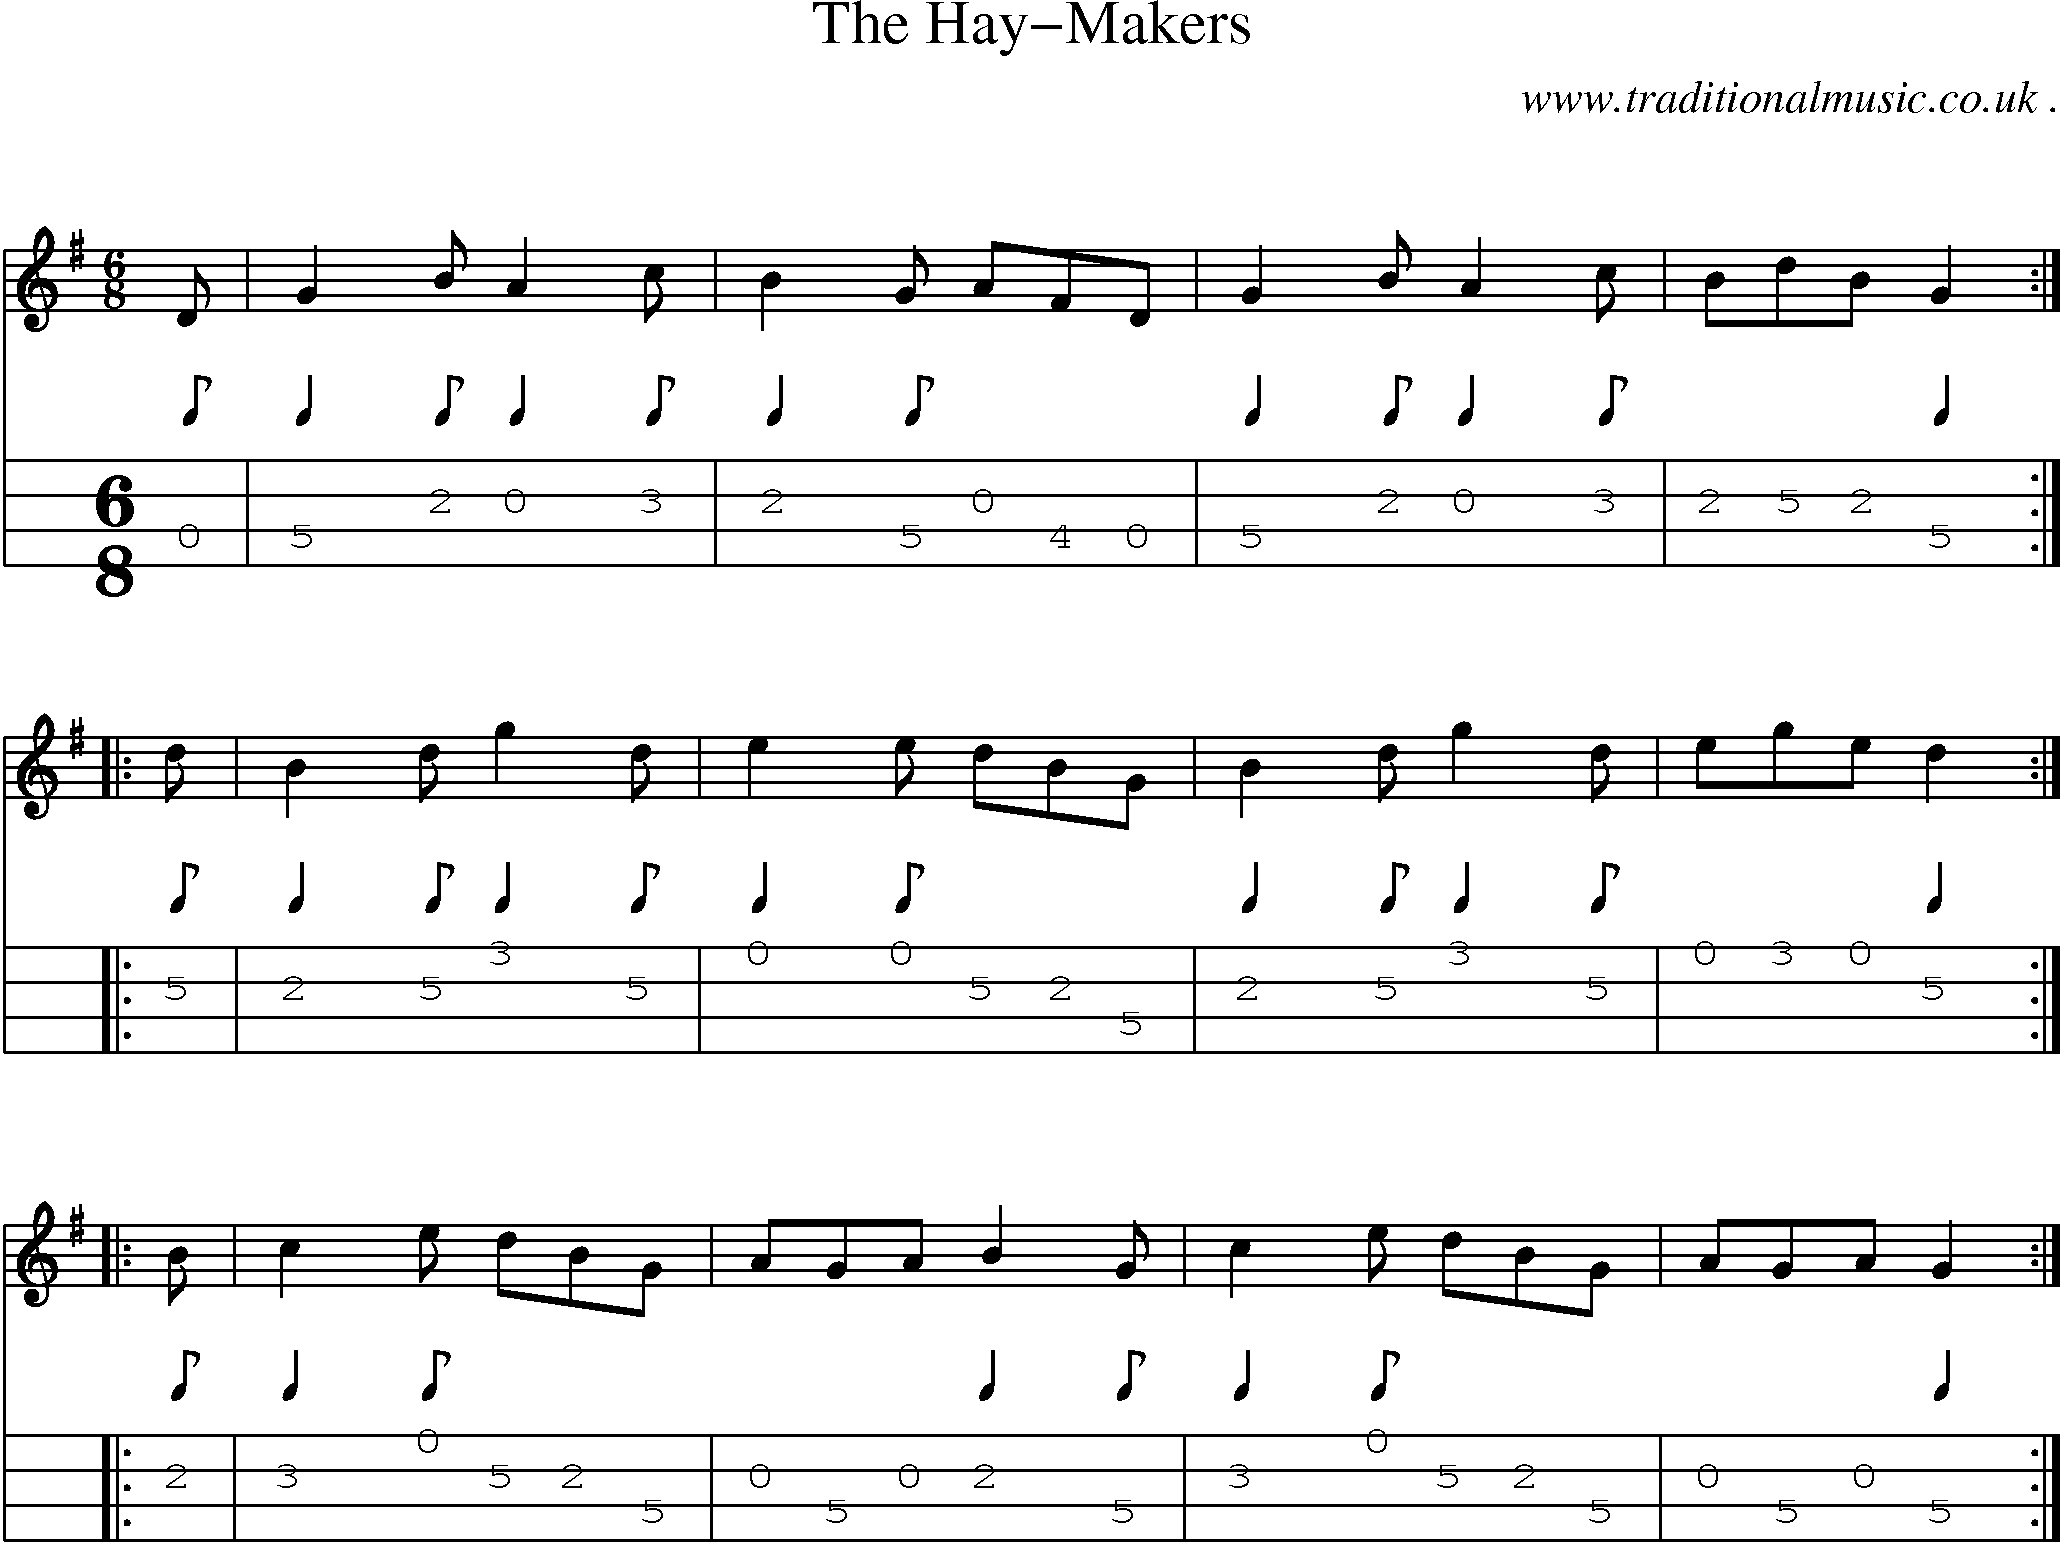 Sheet-music  score, Chords and Mandolin Tabs for The Hay-makers